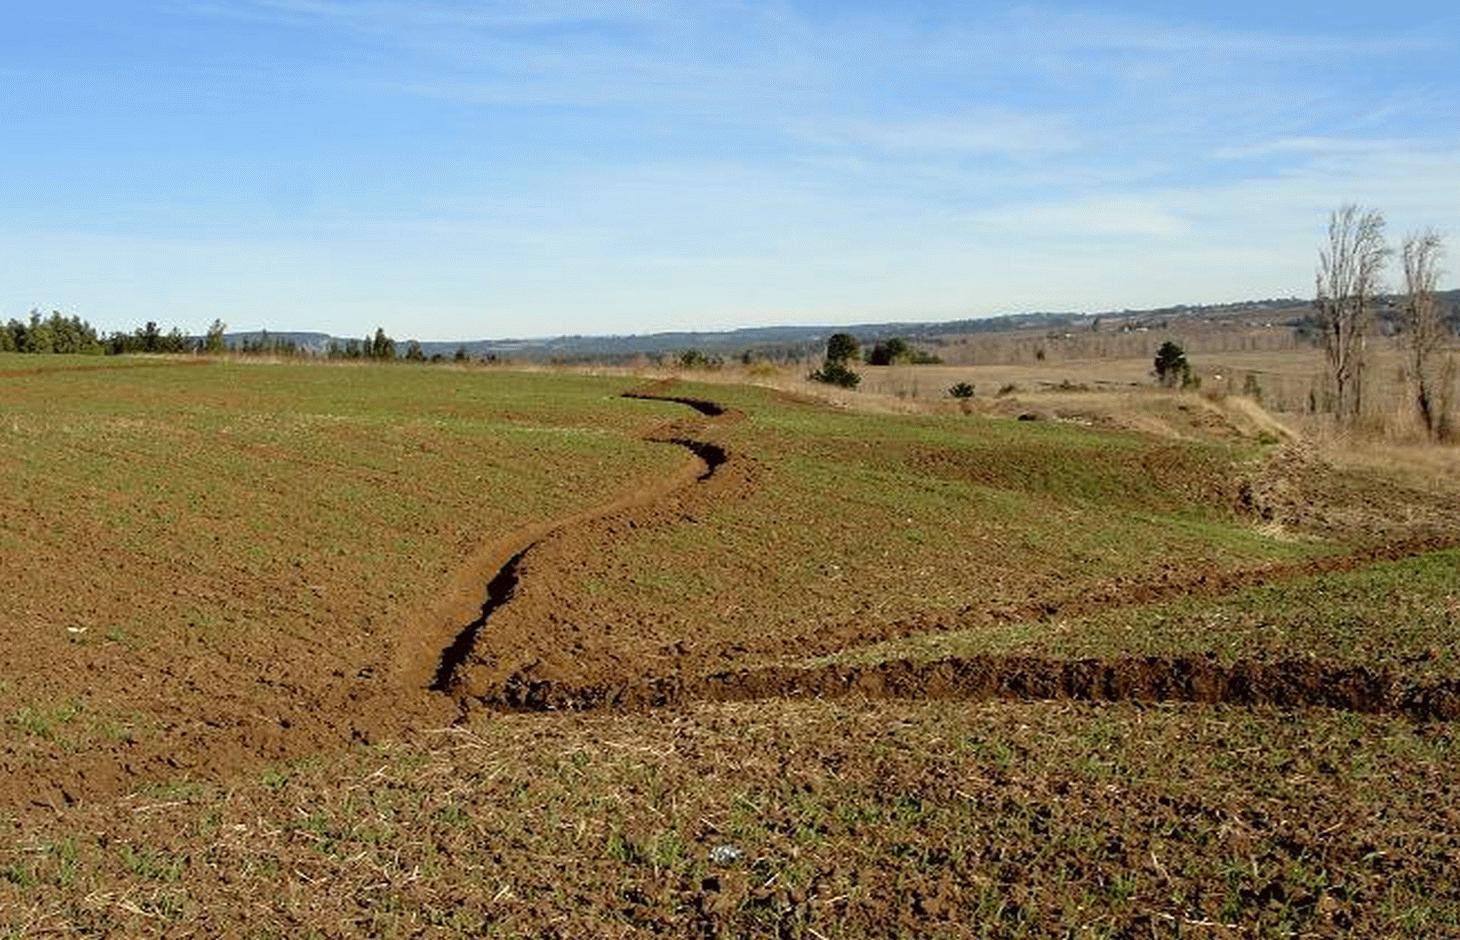 In 2010, 30 ha of a no-tillage wheat-oat crop rotation with subsoiling and contour ploughing together with barrier hedges were implemented by farmers of the County of Yumbel